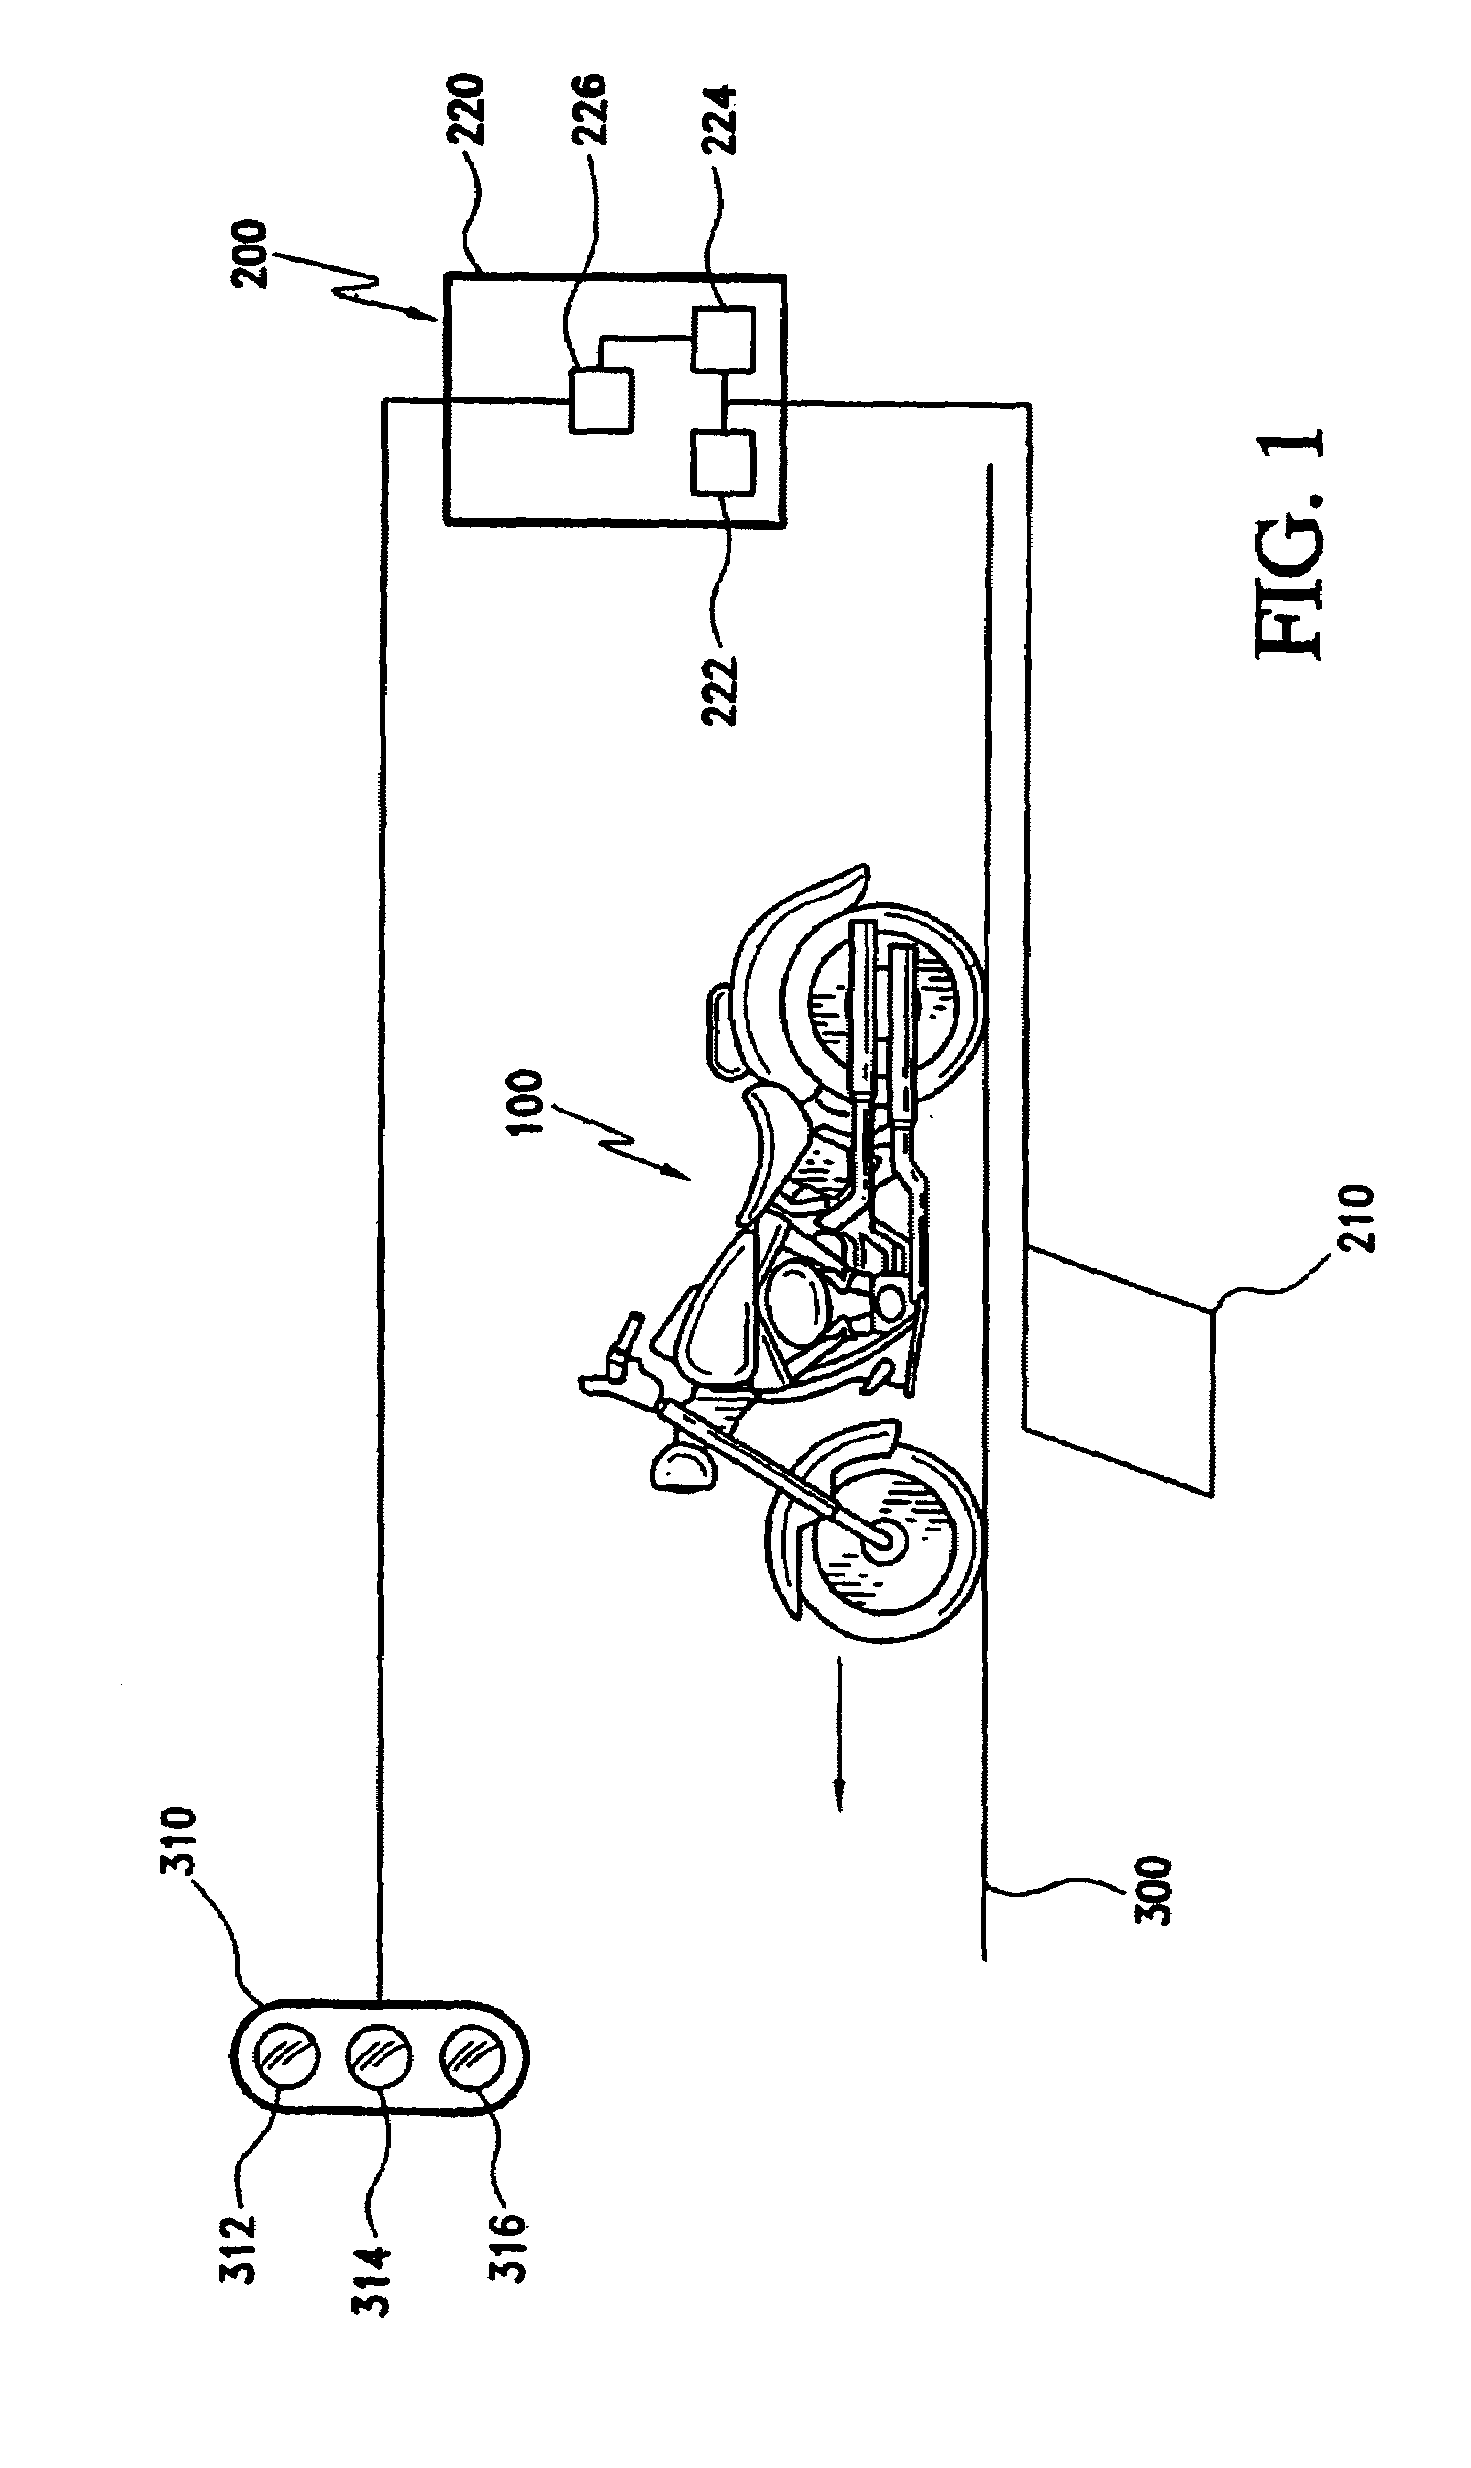 Apparatus and method for activating an inductance loop vehicle detection system